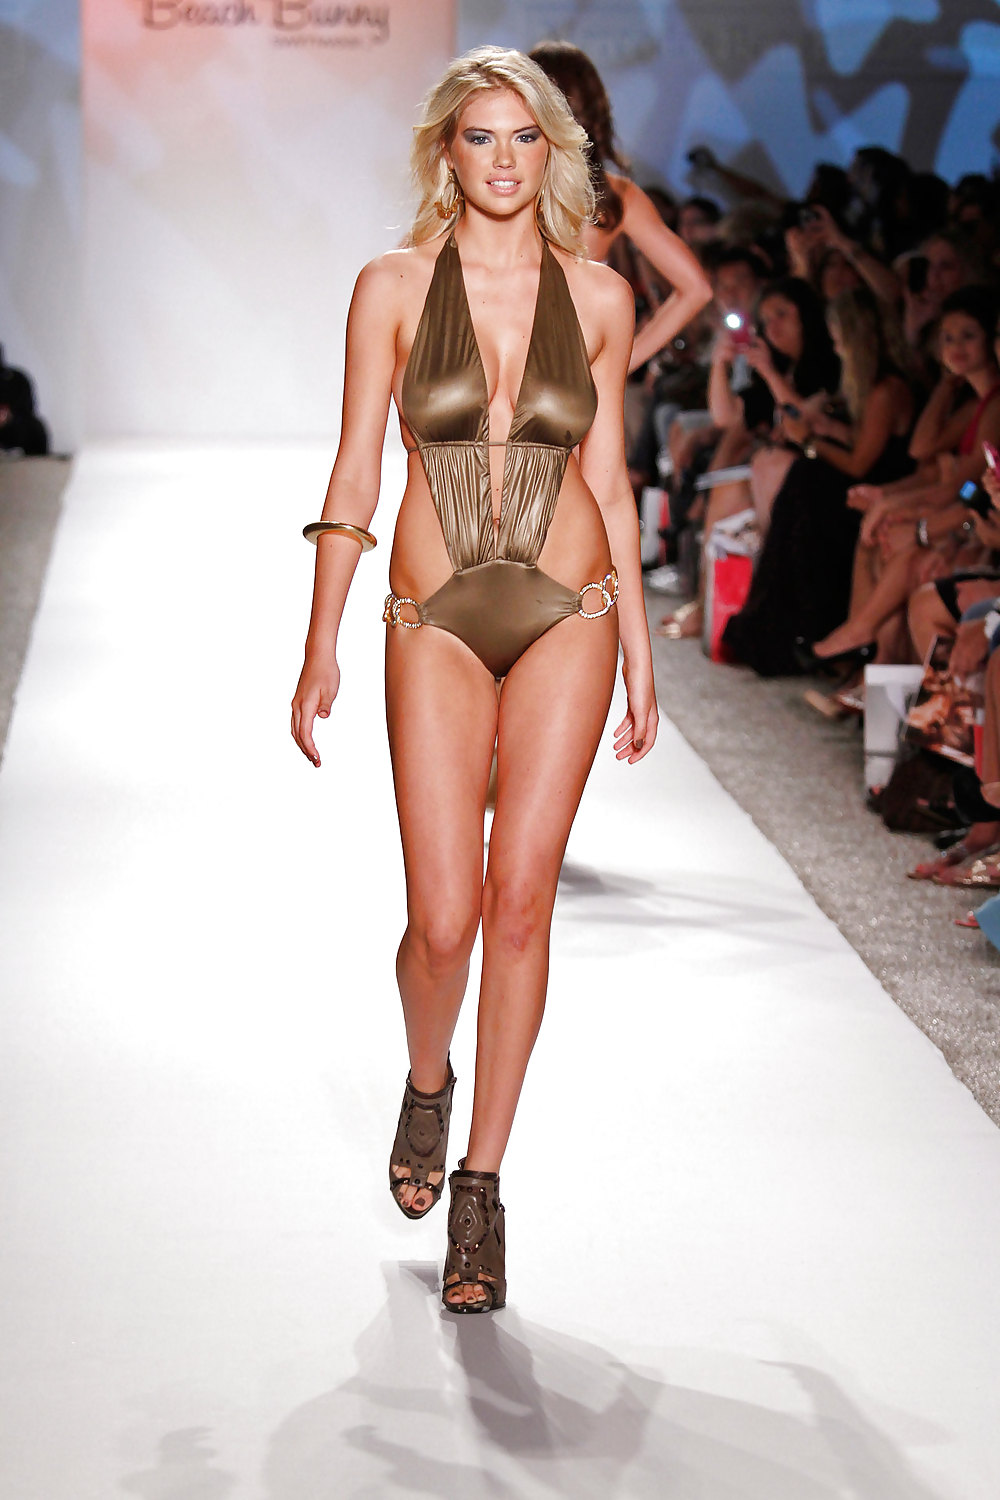 Kate Upton Cleavage on the Catwalk #3743784